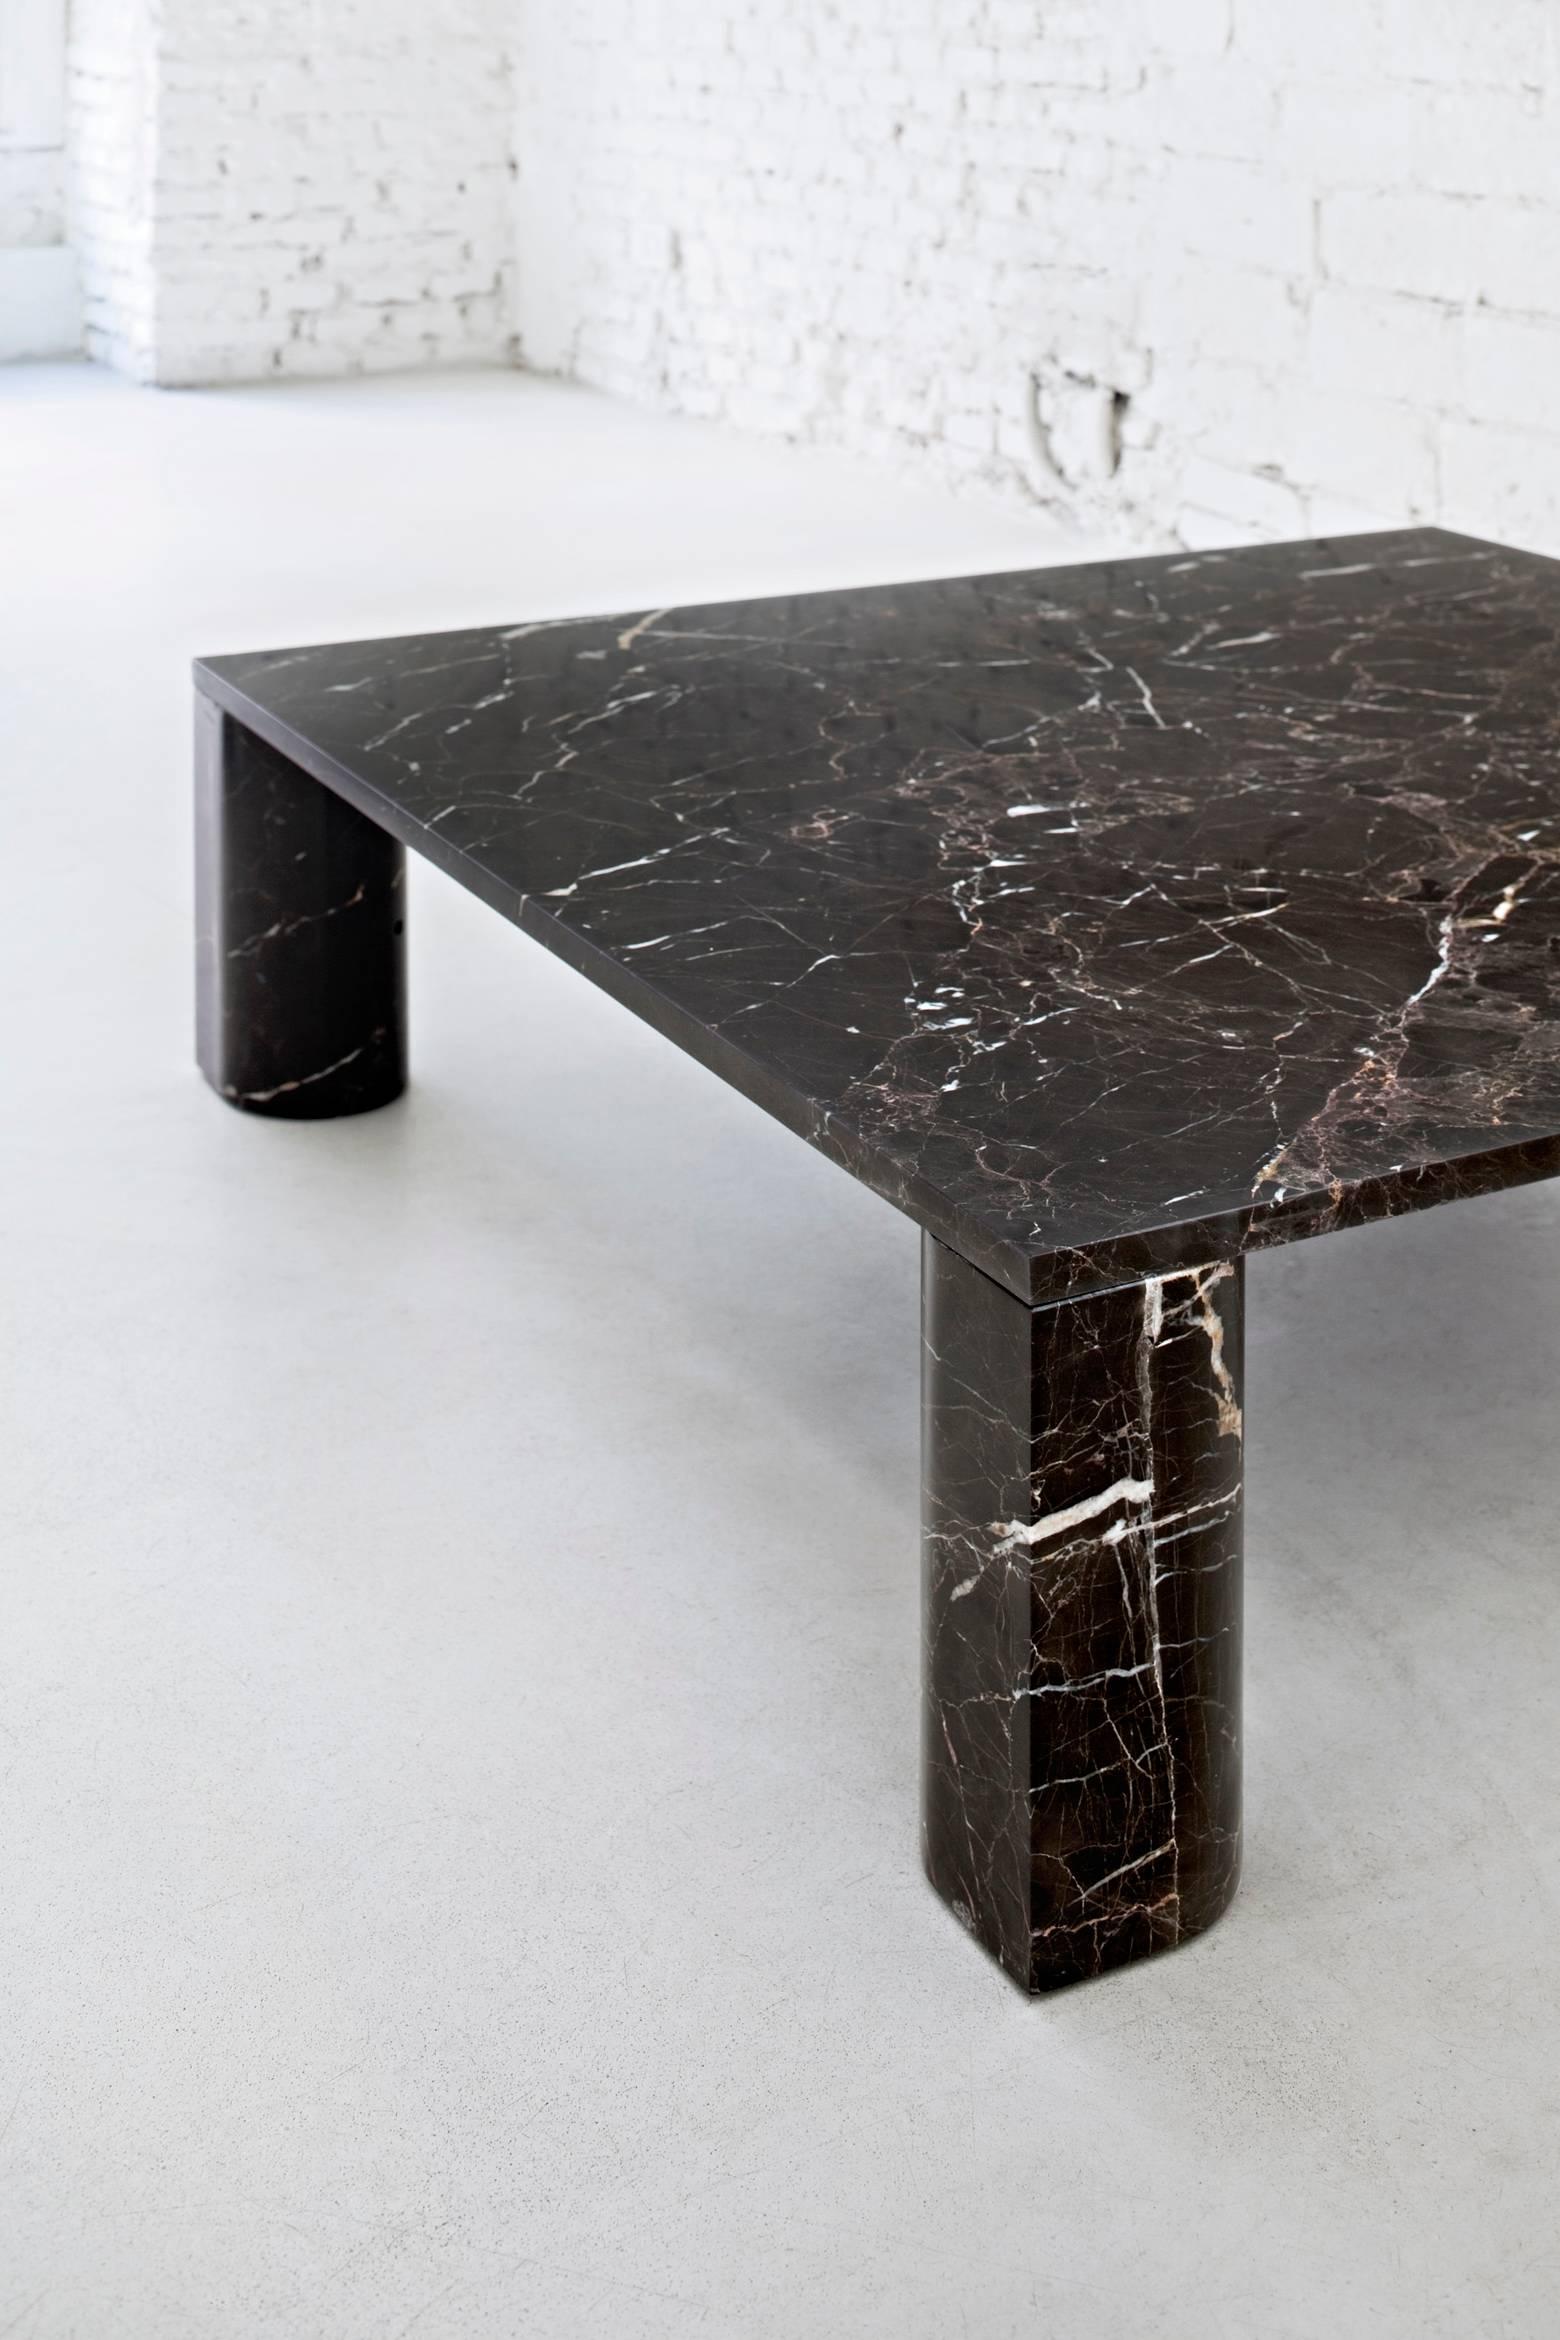 The stone is the star of the show in these tables which were designed by Michael Anastassiades with the specific intention of highlighting the opulence of the marbles chosen for his collection ‘Love Me, Love Me Not’.

Instead of the highly polished